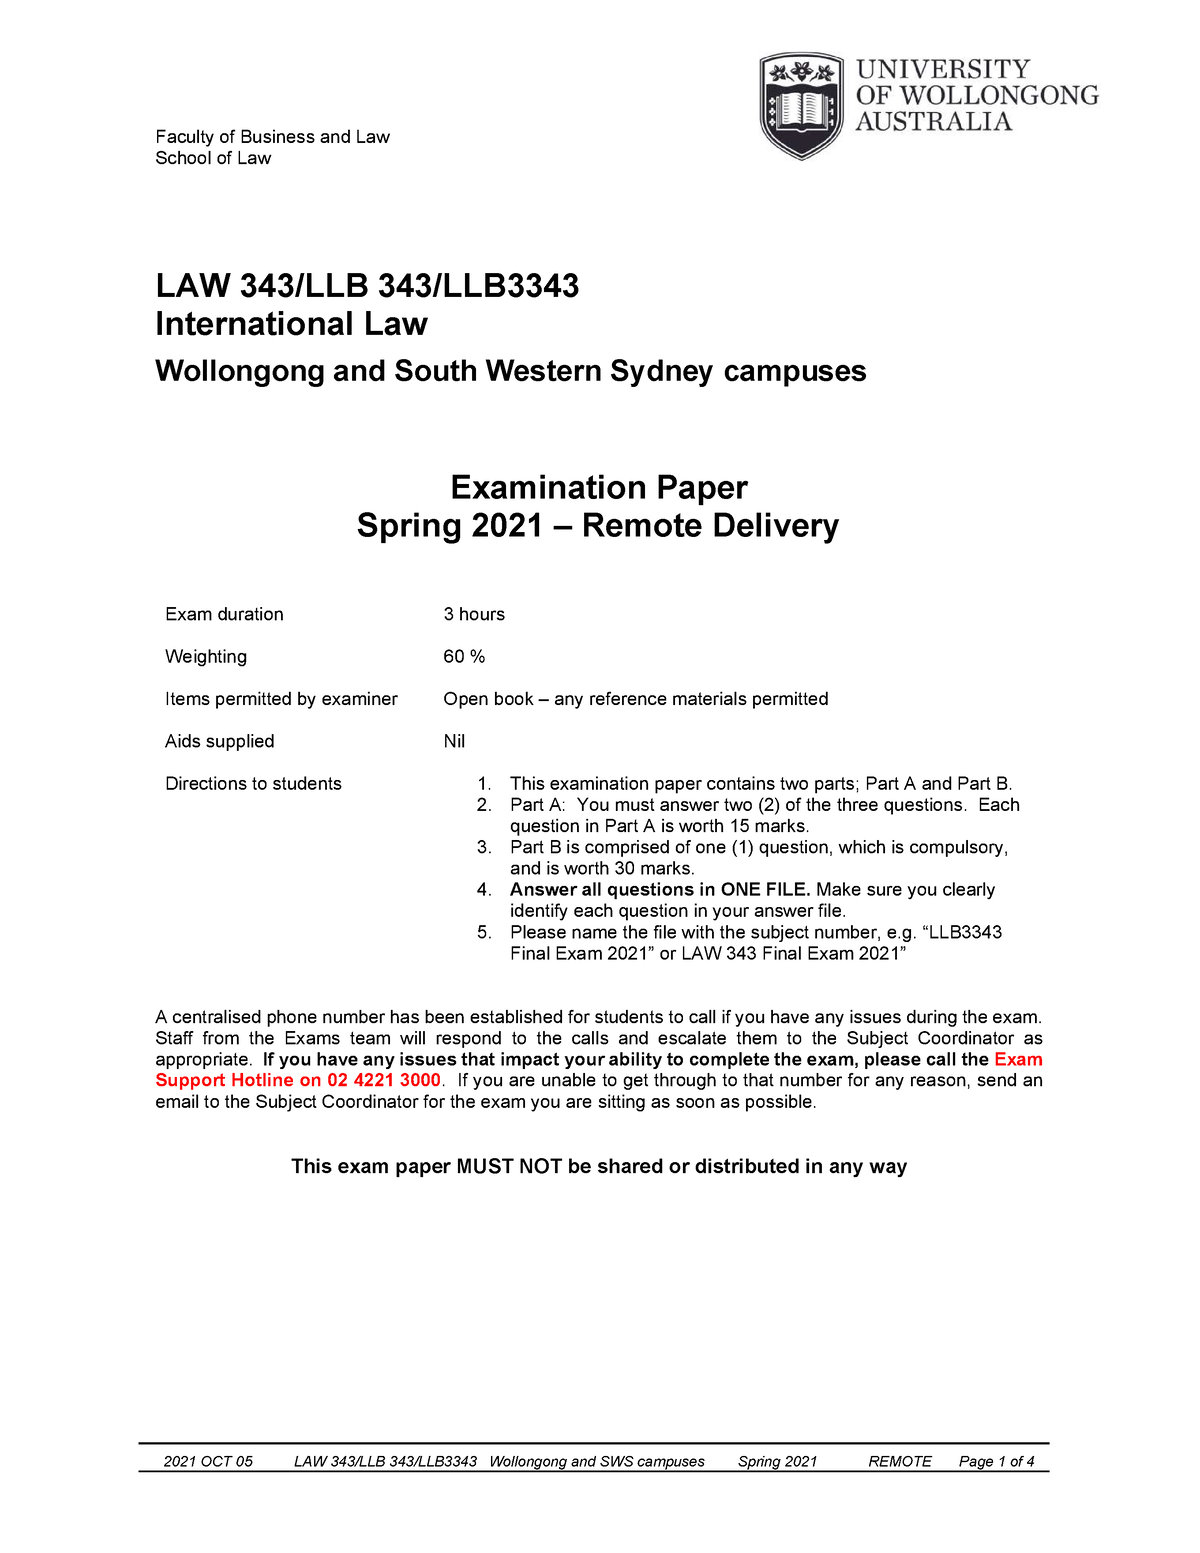 2021-spring-law-343-llb-343-llb3343-final-exam-remote-wollongong-sws